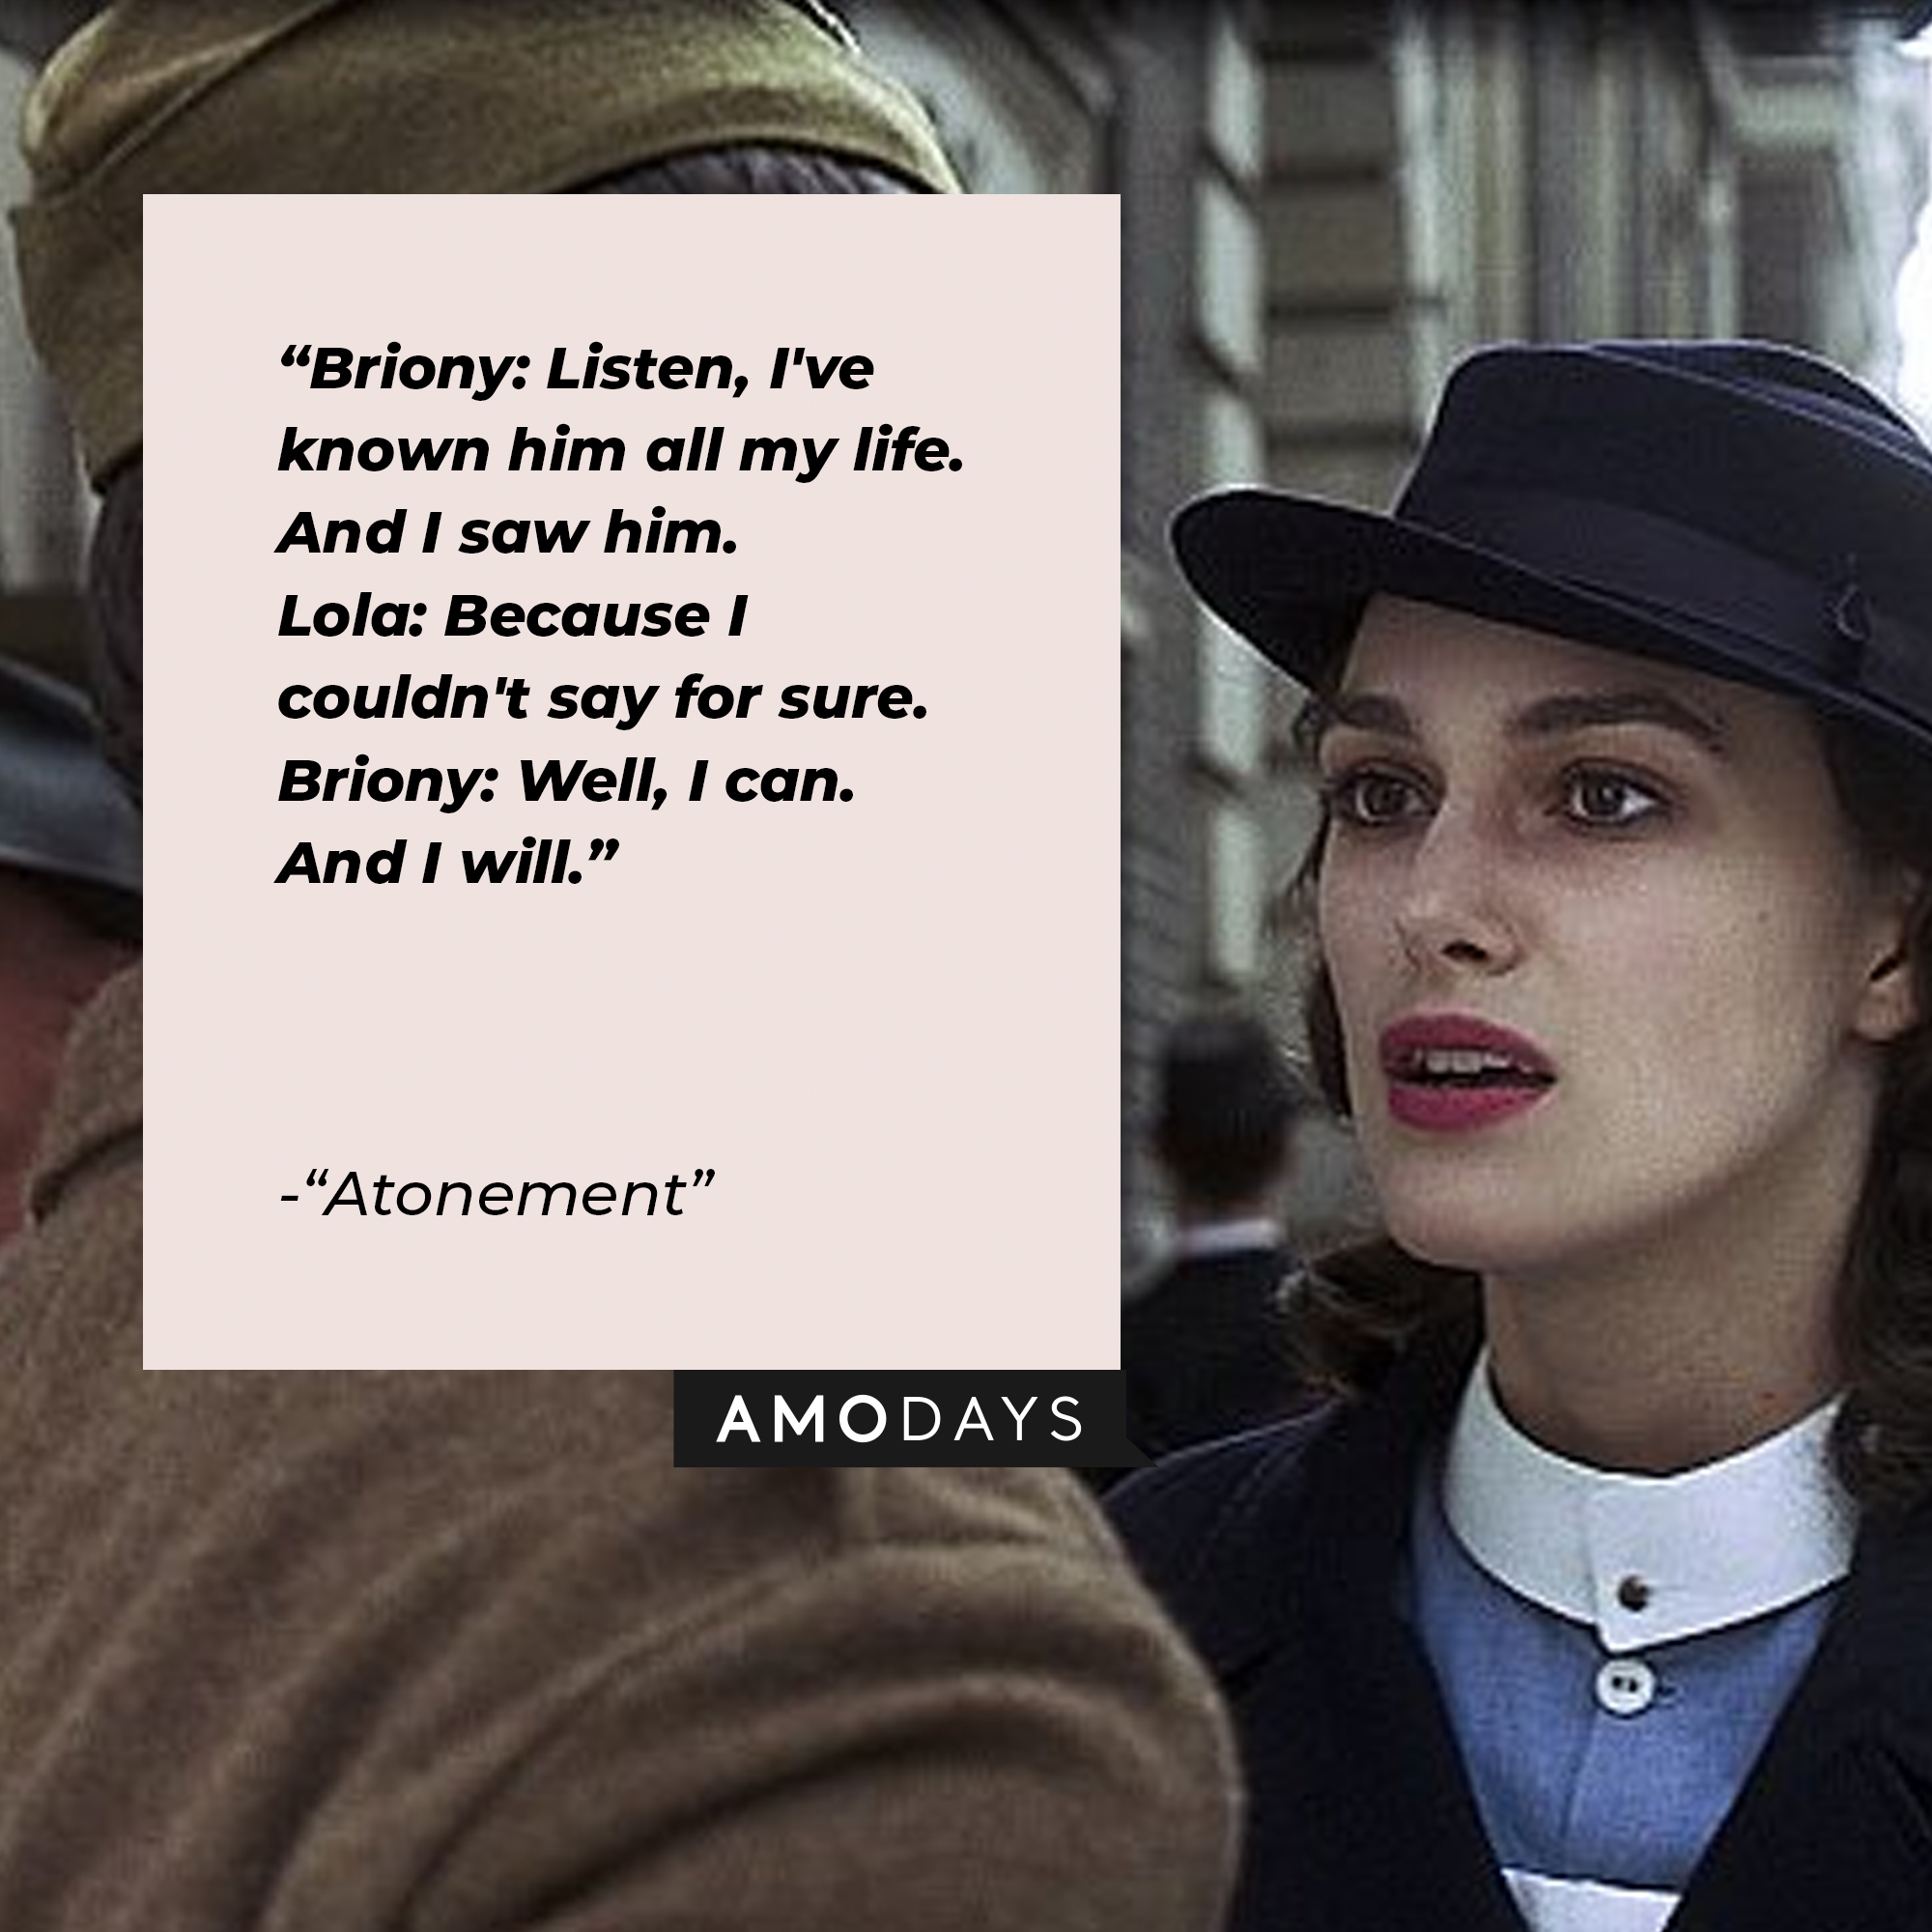 A photo of Cecilia with the dialogue, "Briony: Listen, I've known him all my life. And I saw him. Lola: Because I couldn't say for sure. Briony: Well, I can. And I will." | Source: Facebook/AtonementMovie